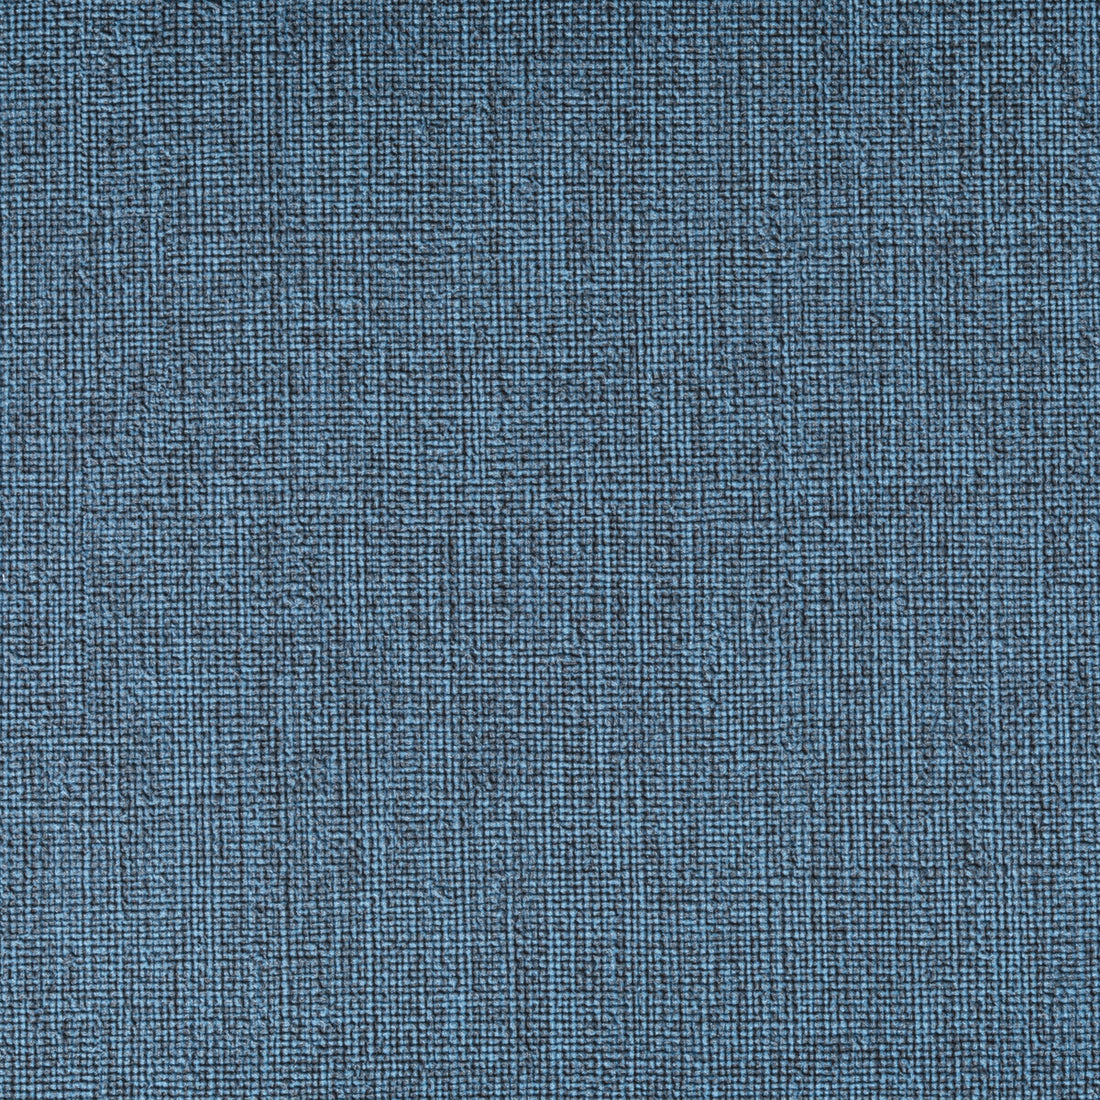 Caslin fabric in bluebird color - pattern CASLIN.55.0 - by Kravet Contract in the Foundations / Value collection